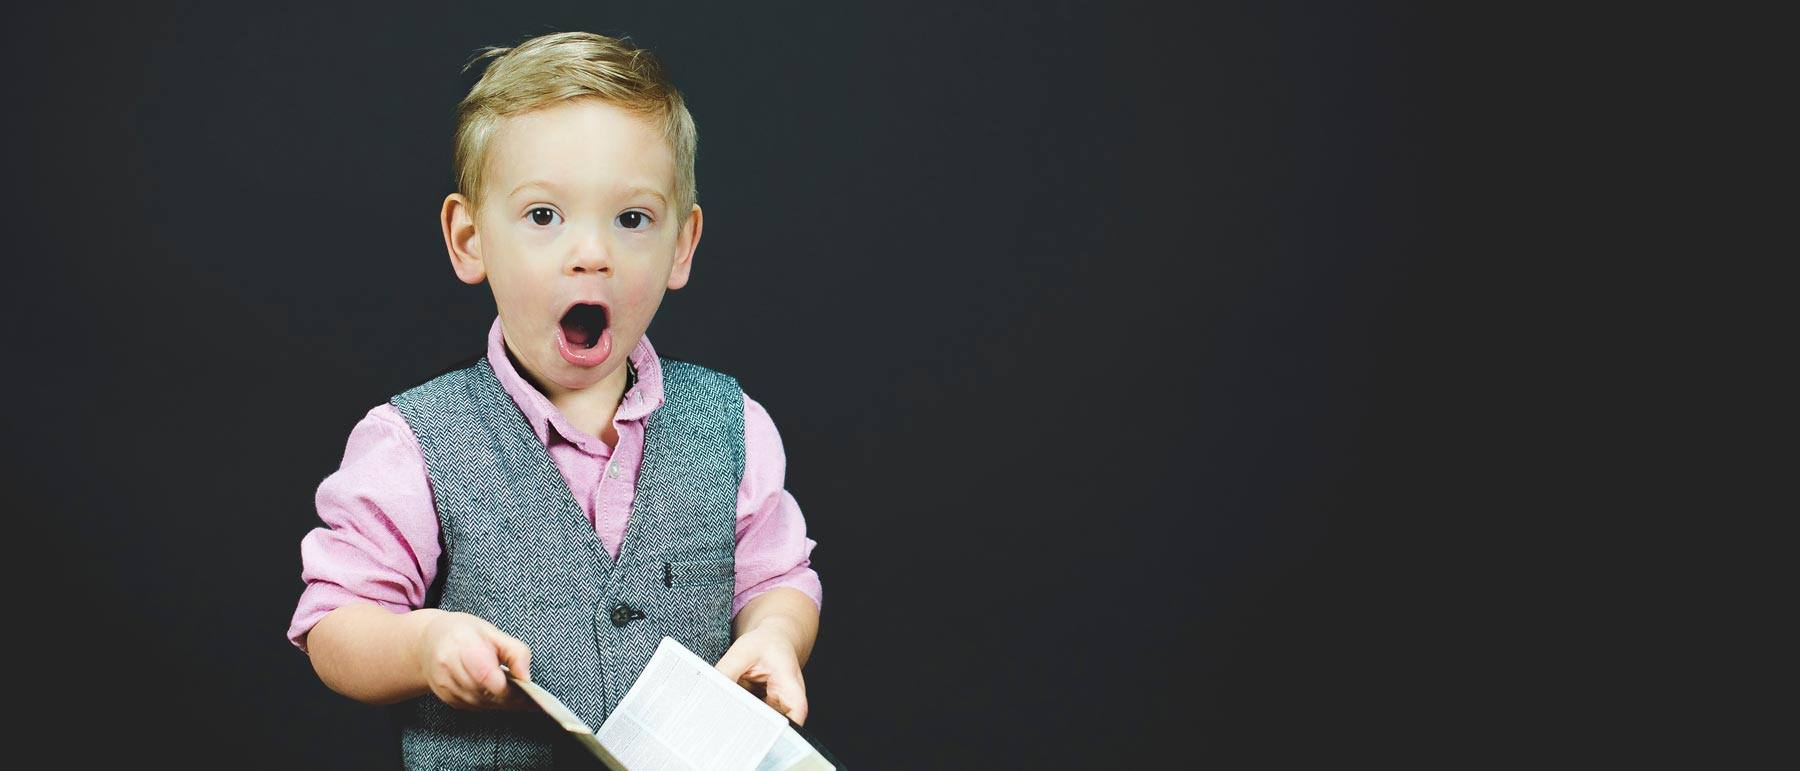 little boy in suit vest with shocked expression while holding book